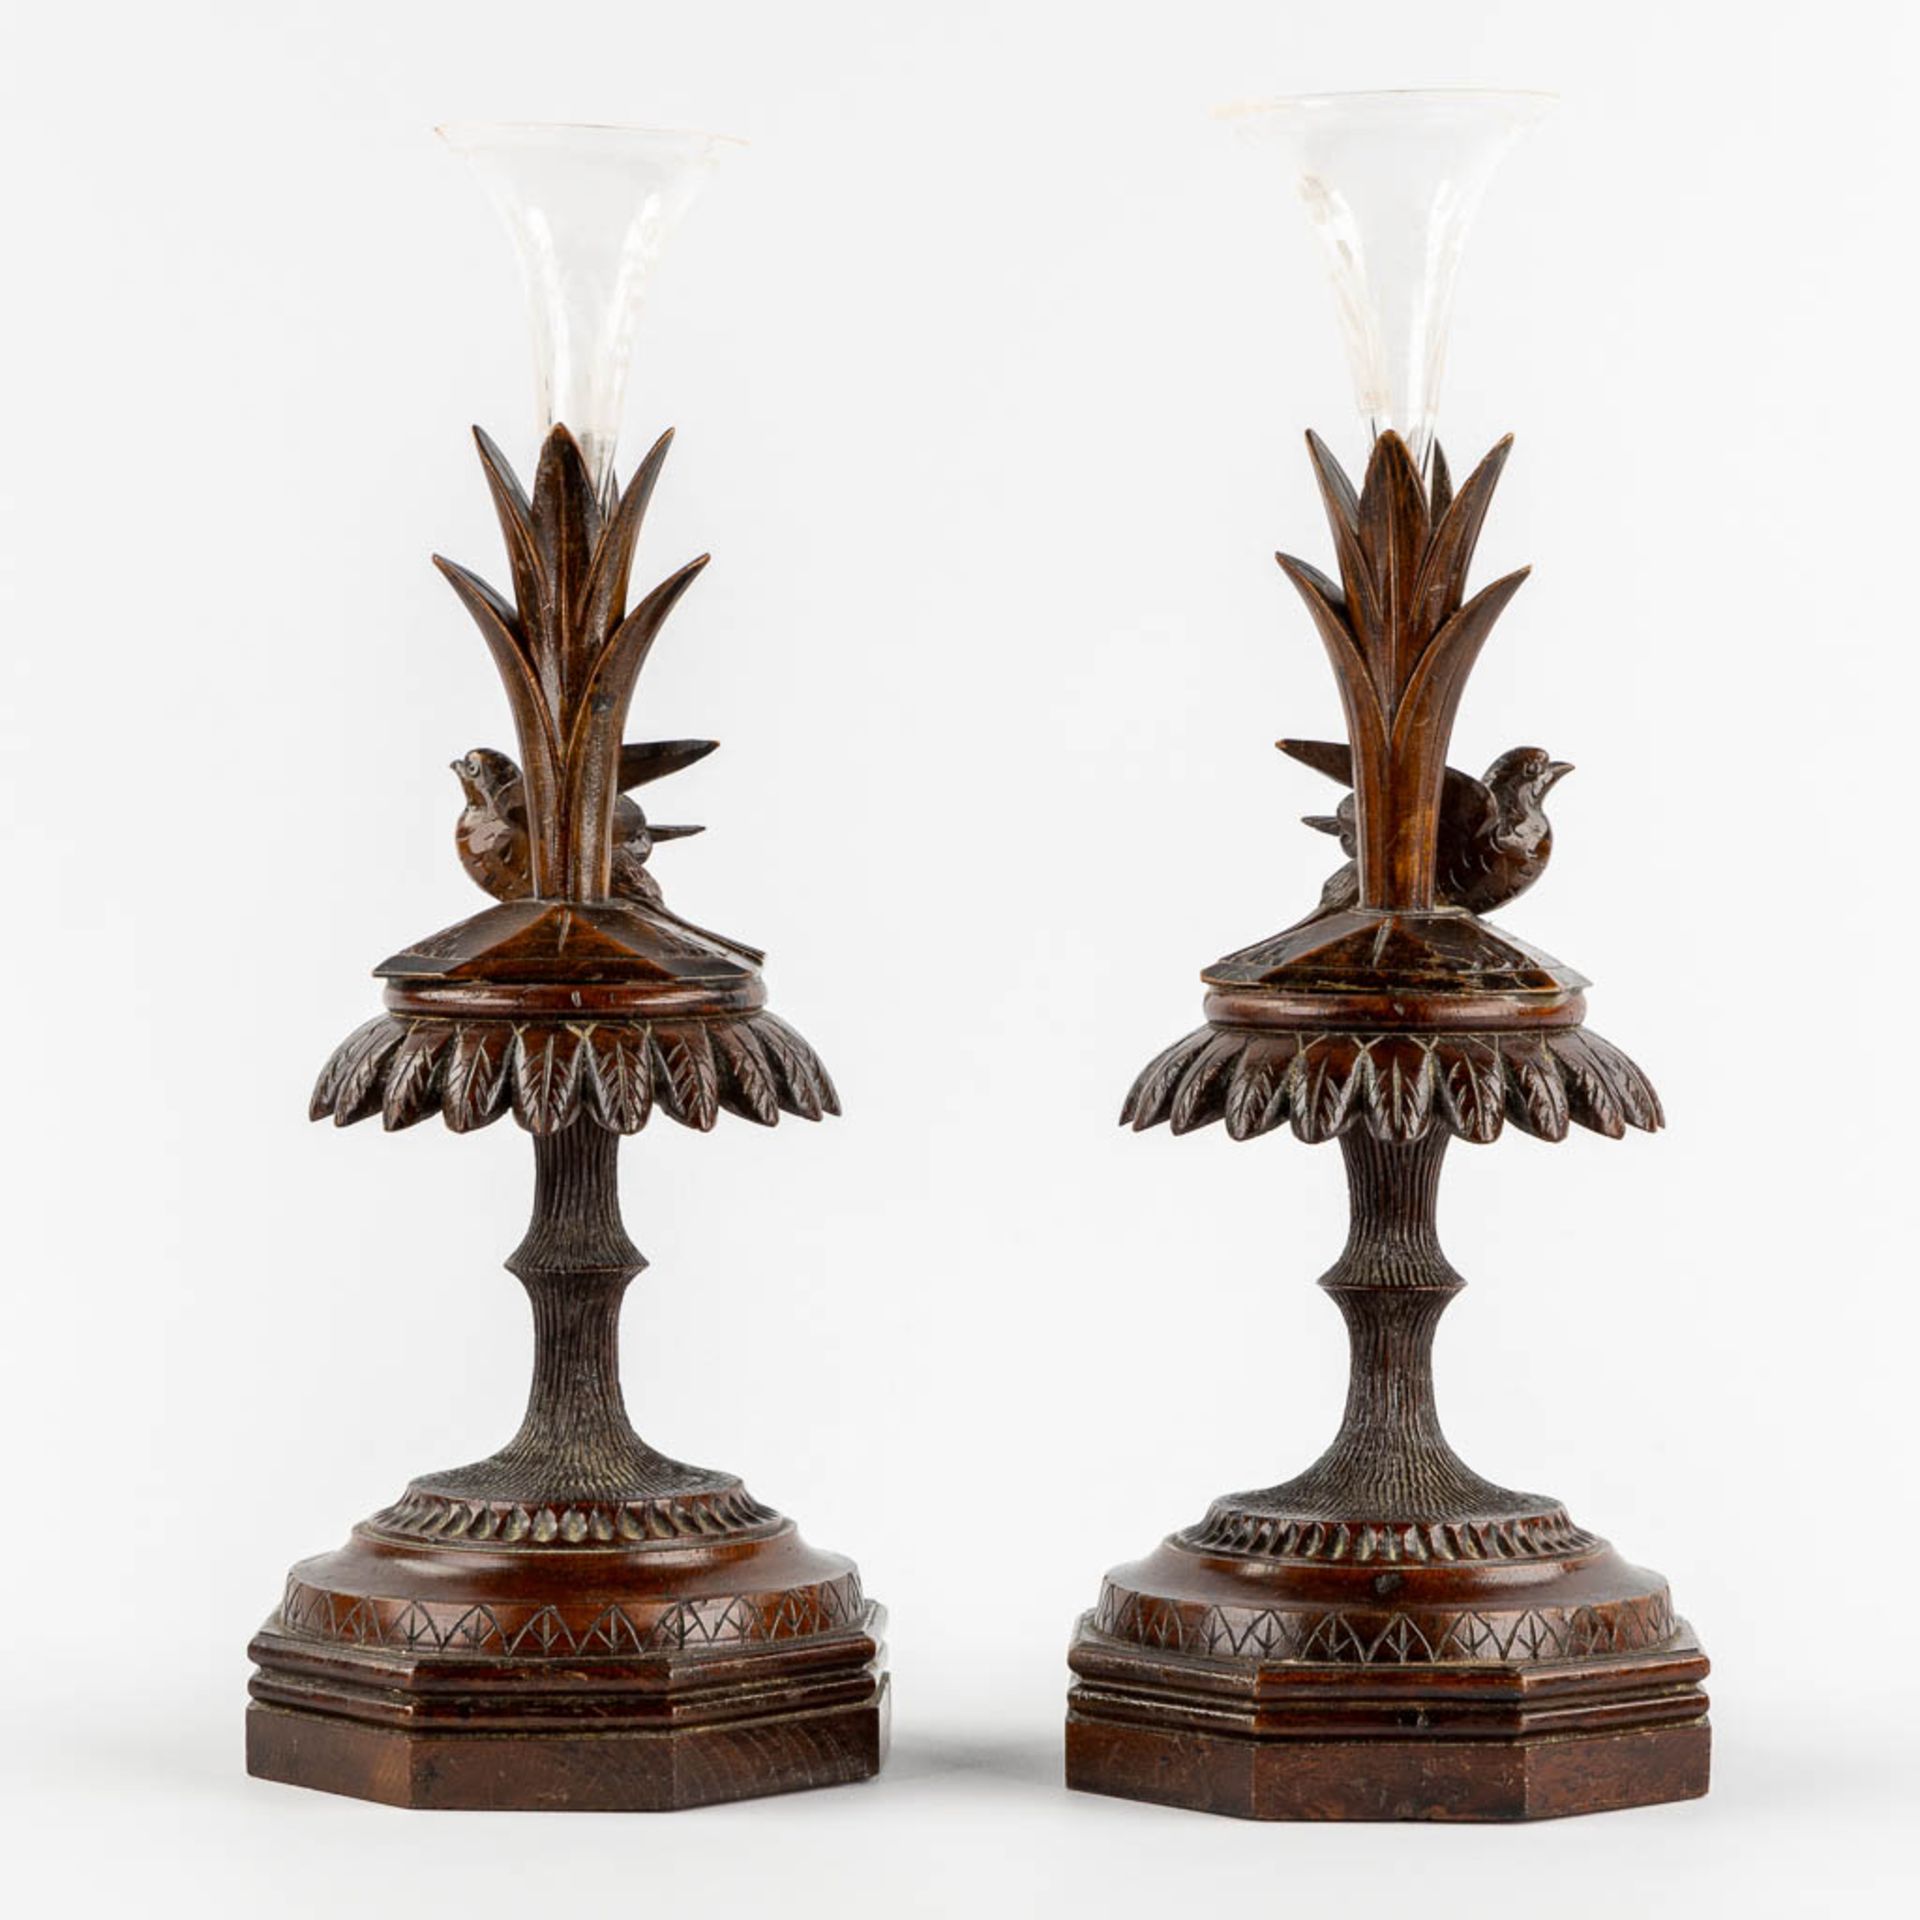 Two bases for Trumpet Vases, Schwartzwald or Black Forest. Circa 1880. (L:14,5 x W:14,5 x H:40 cm) - Image 5 of 11